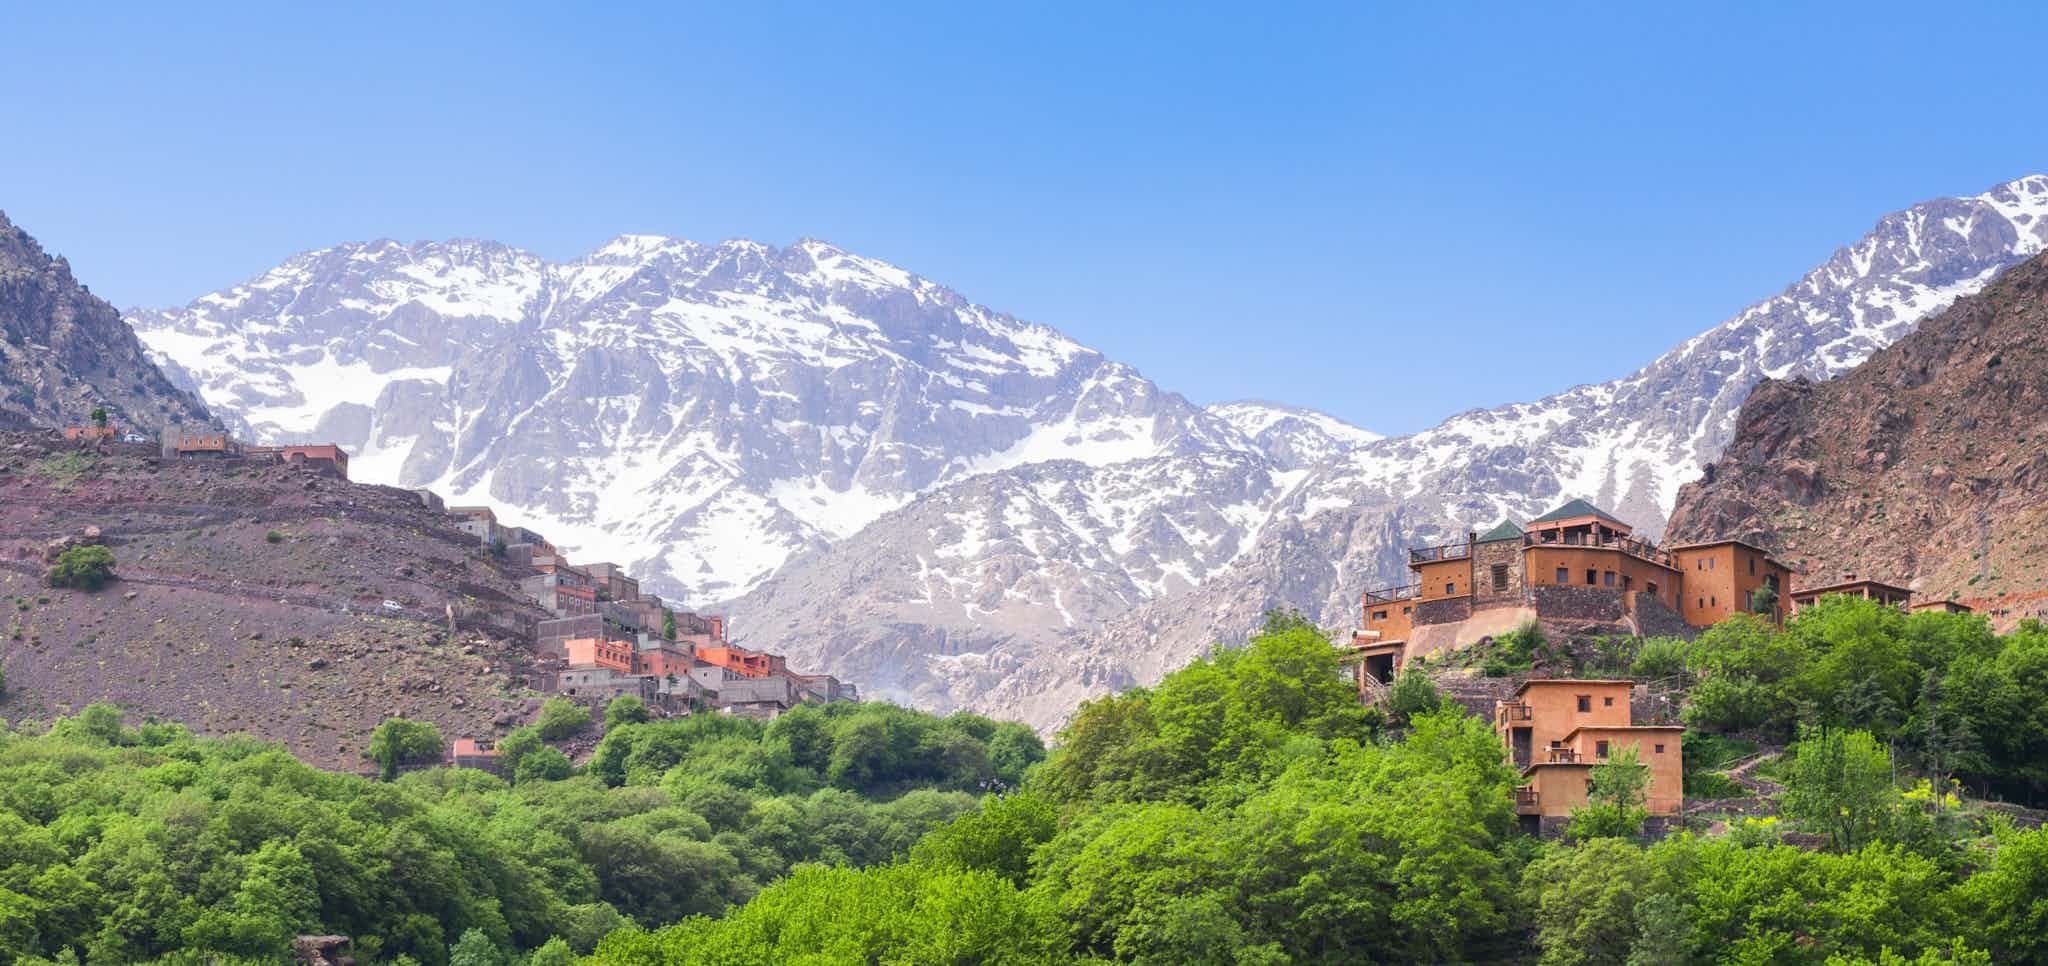 View of Mount Toubkal from Imlil, Morocco.